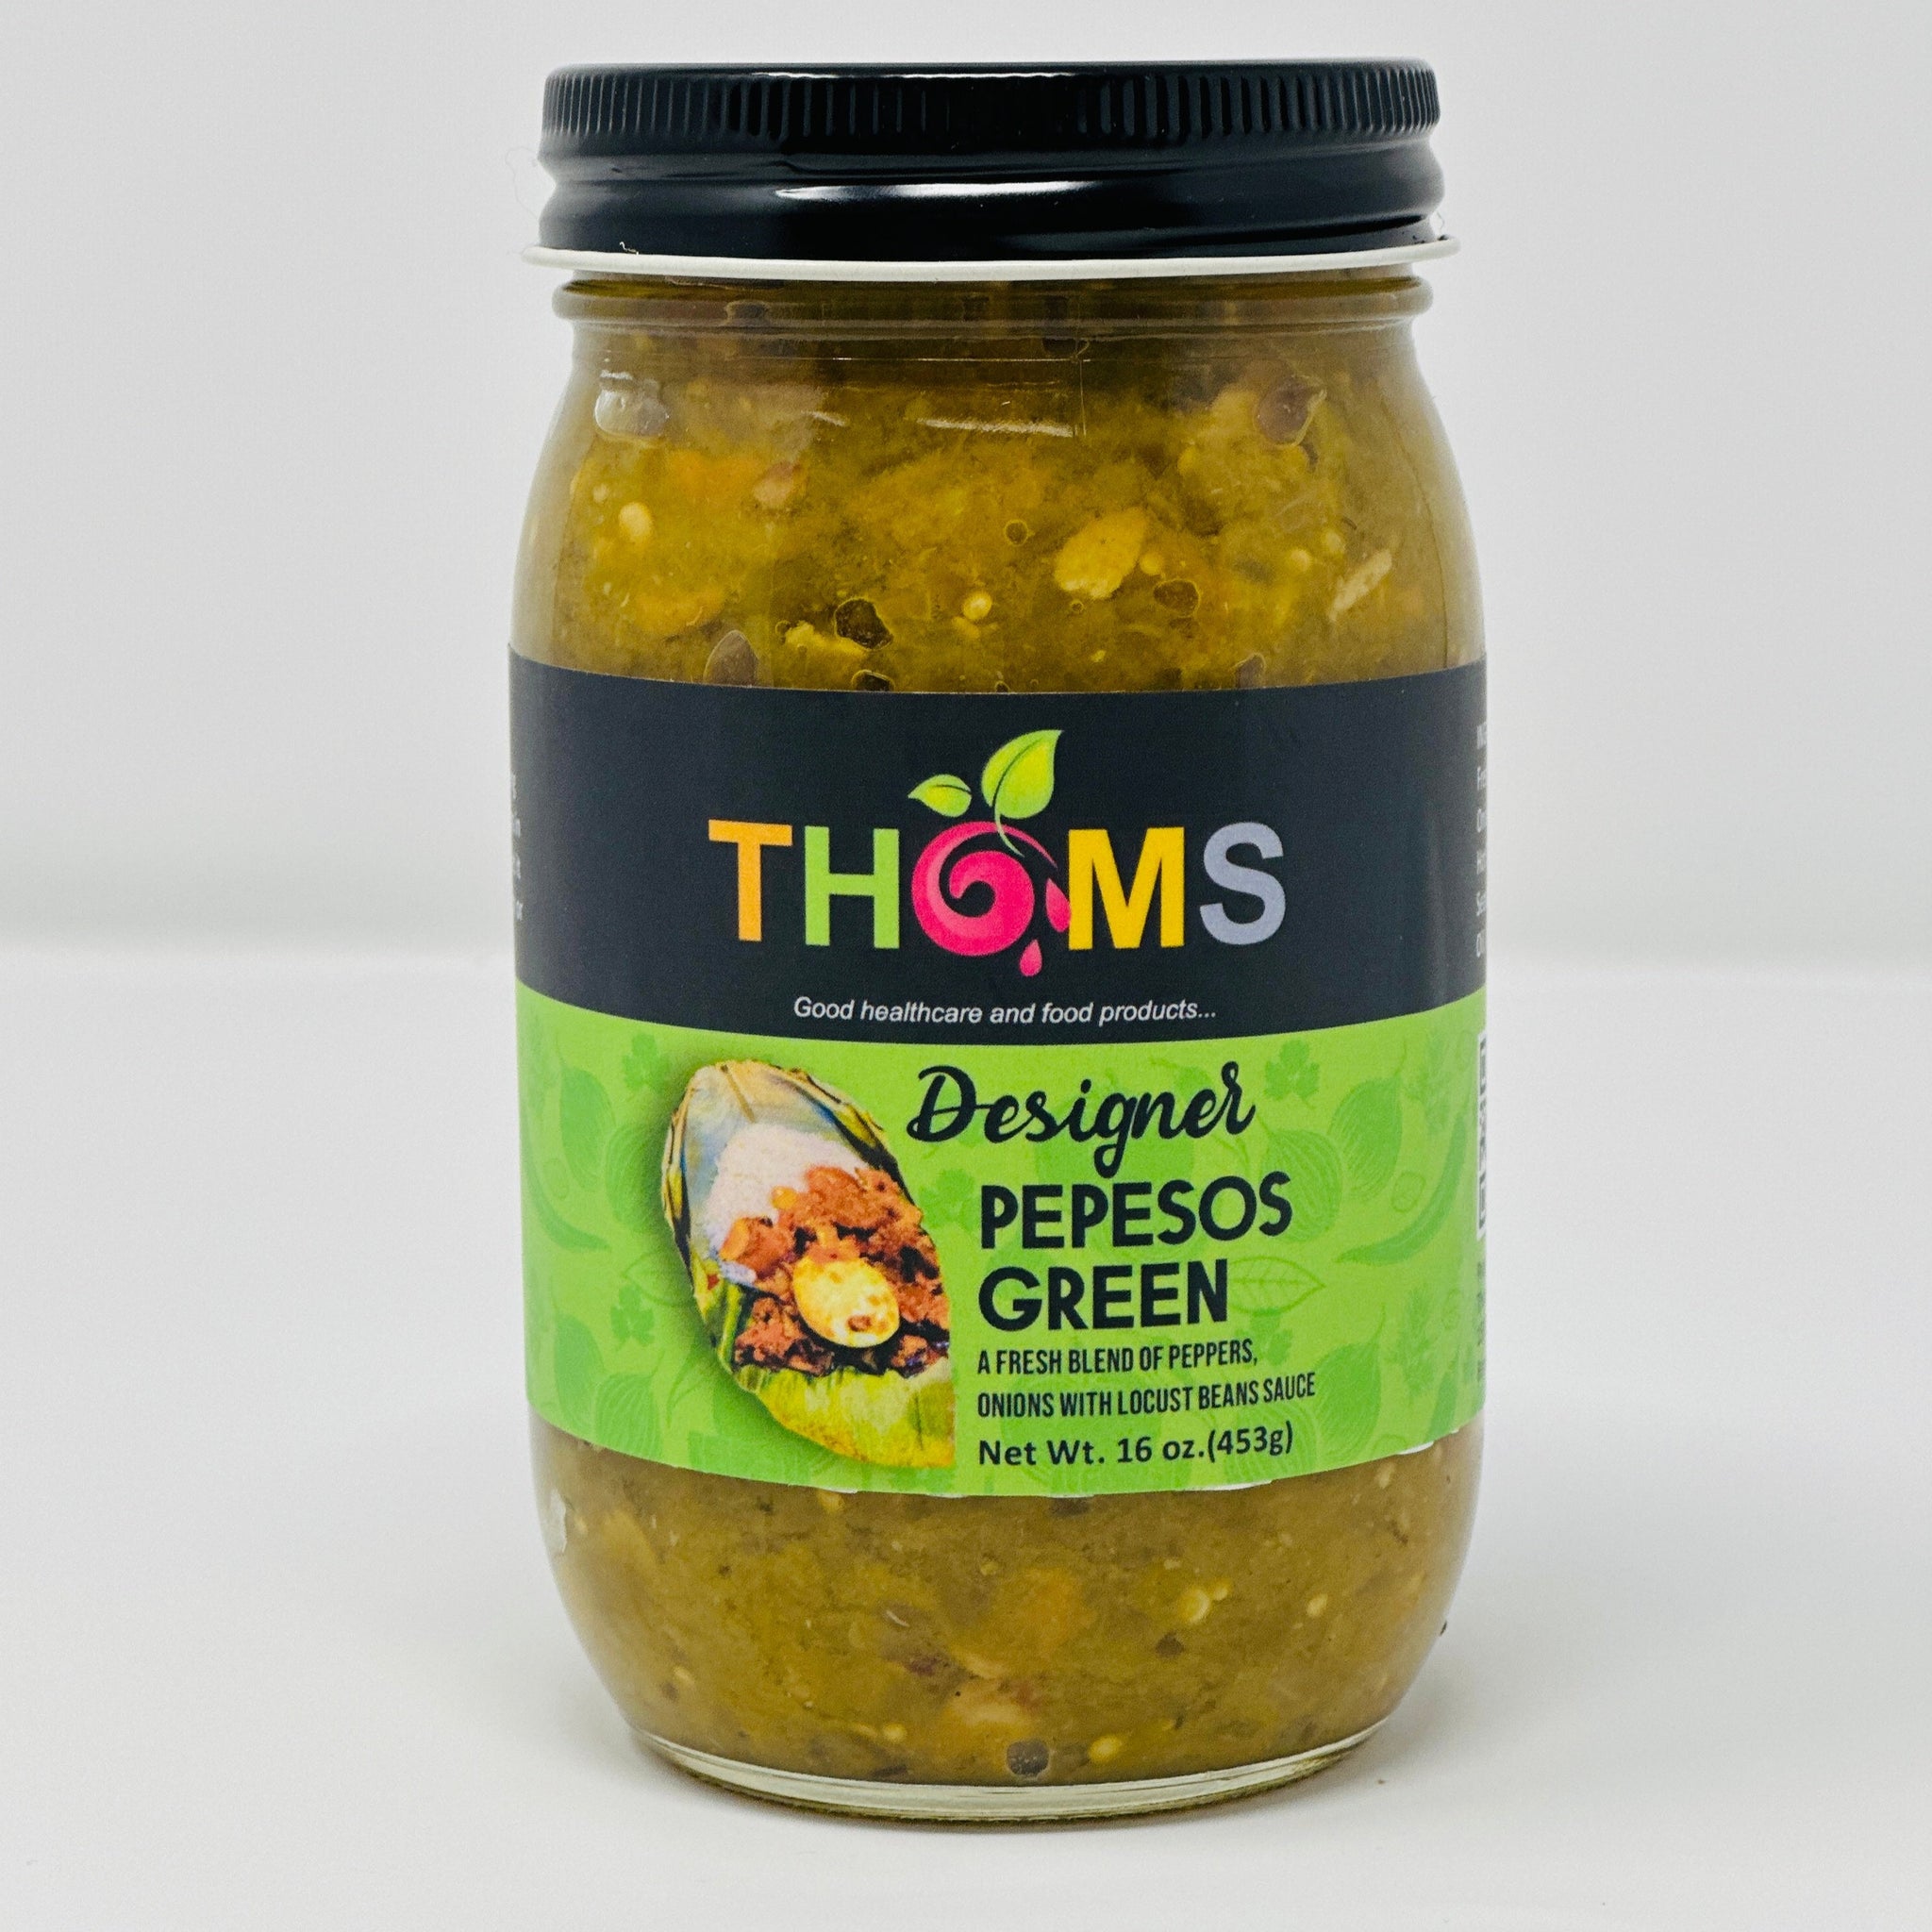 16 OZ DESIGNER PEPESOS "GREEN" sauce, a fresh blend of green peppers with aromatic locust bean flavor!